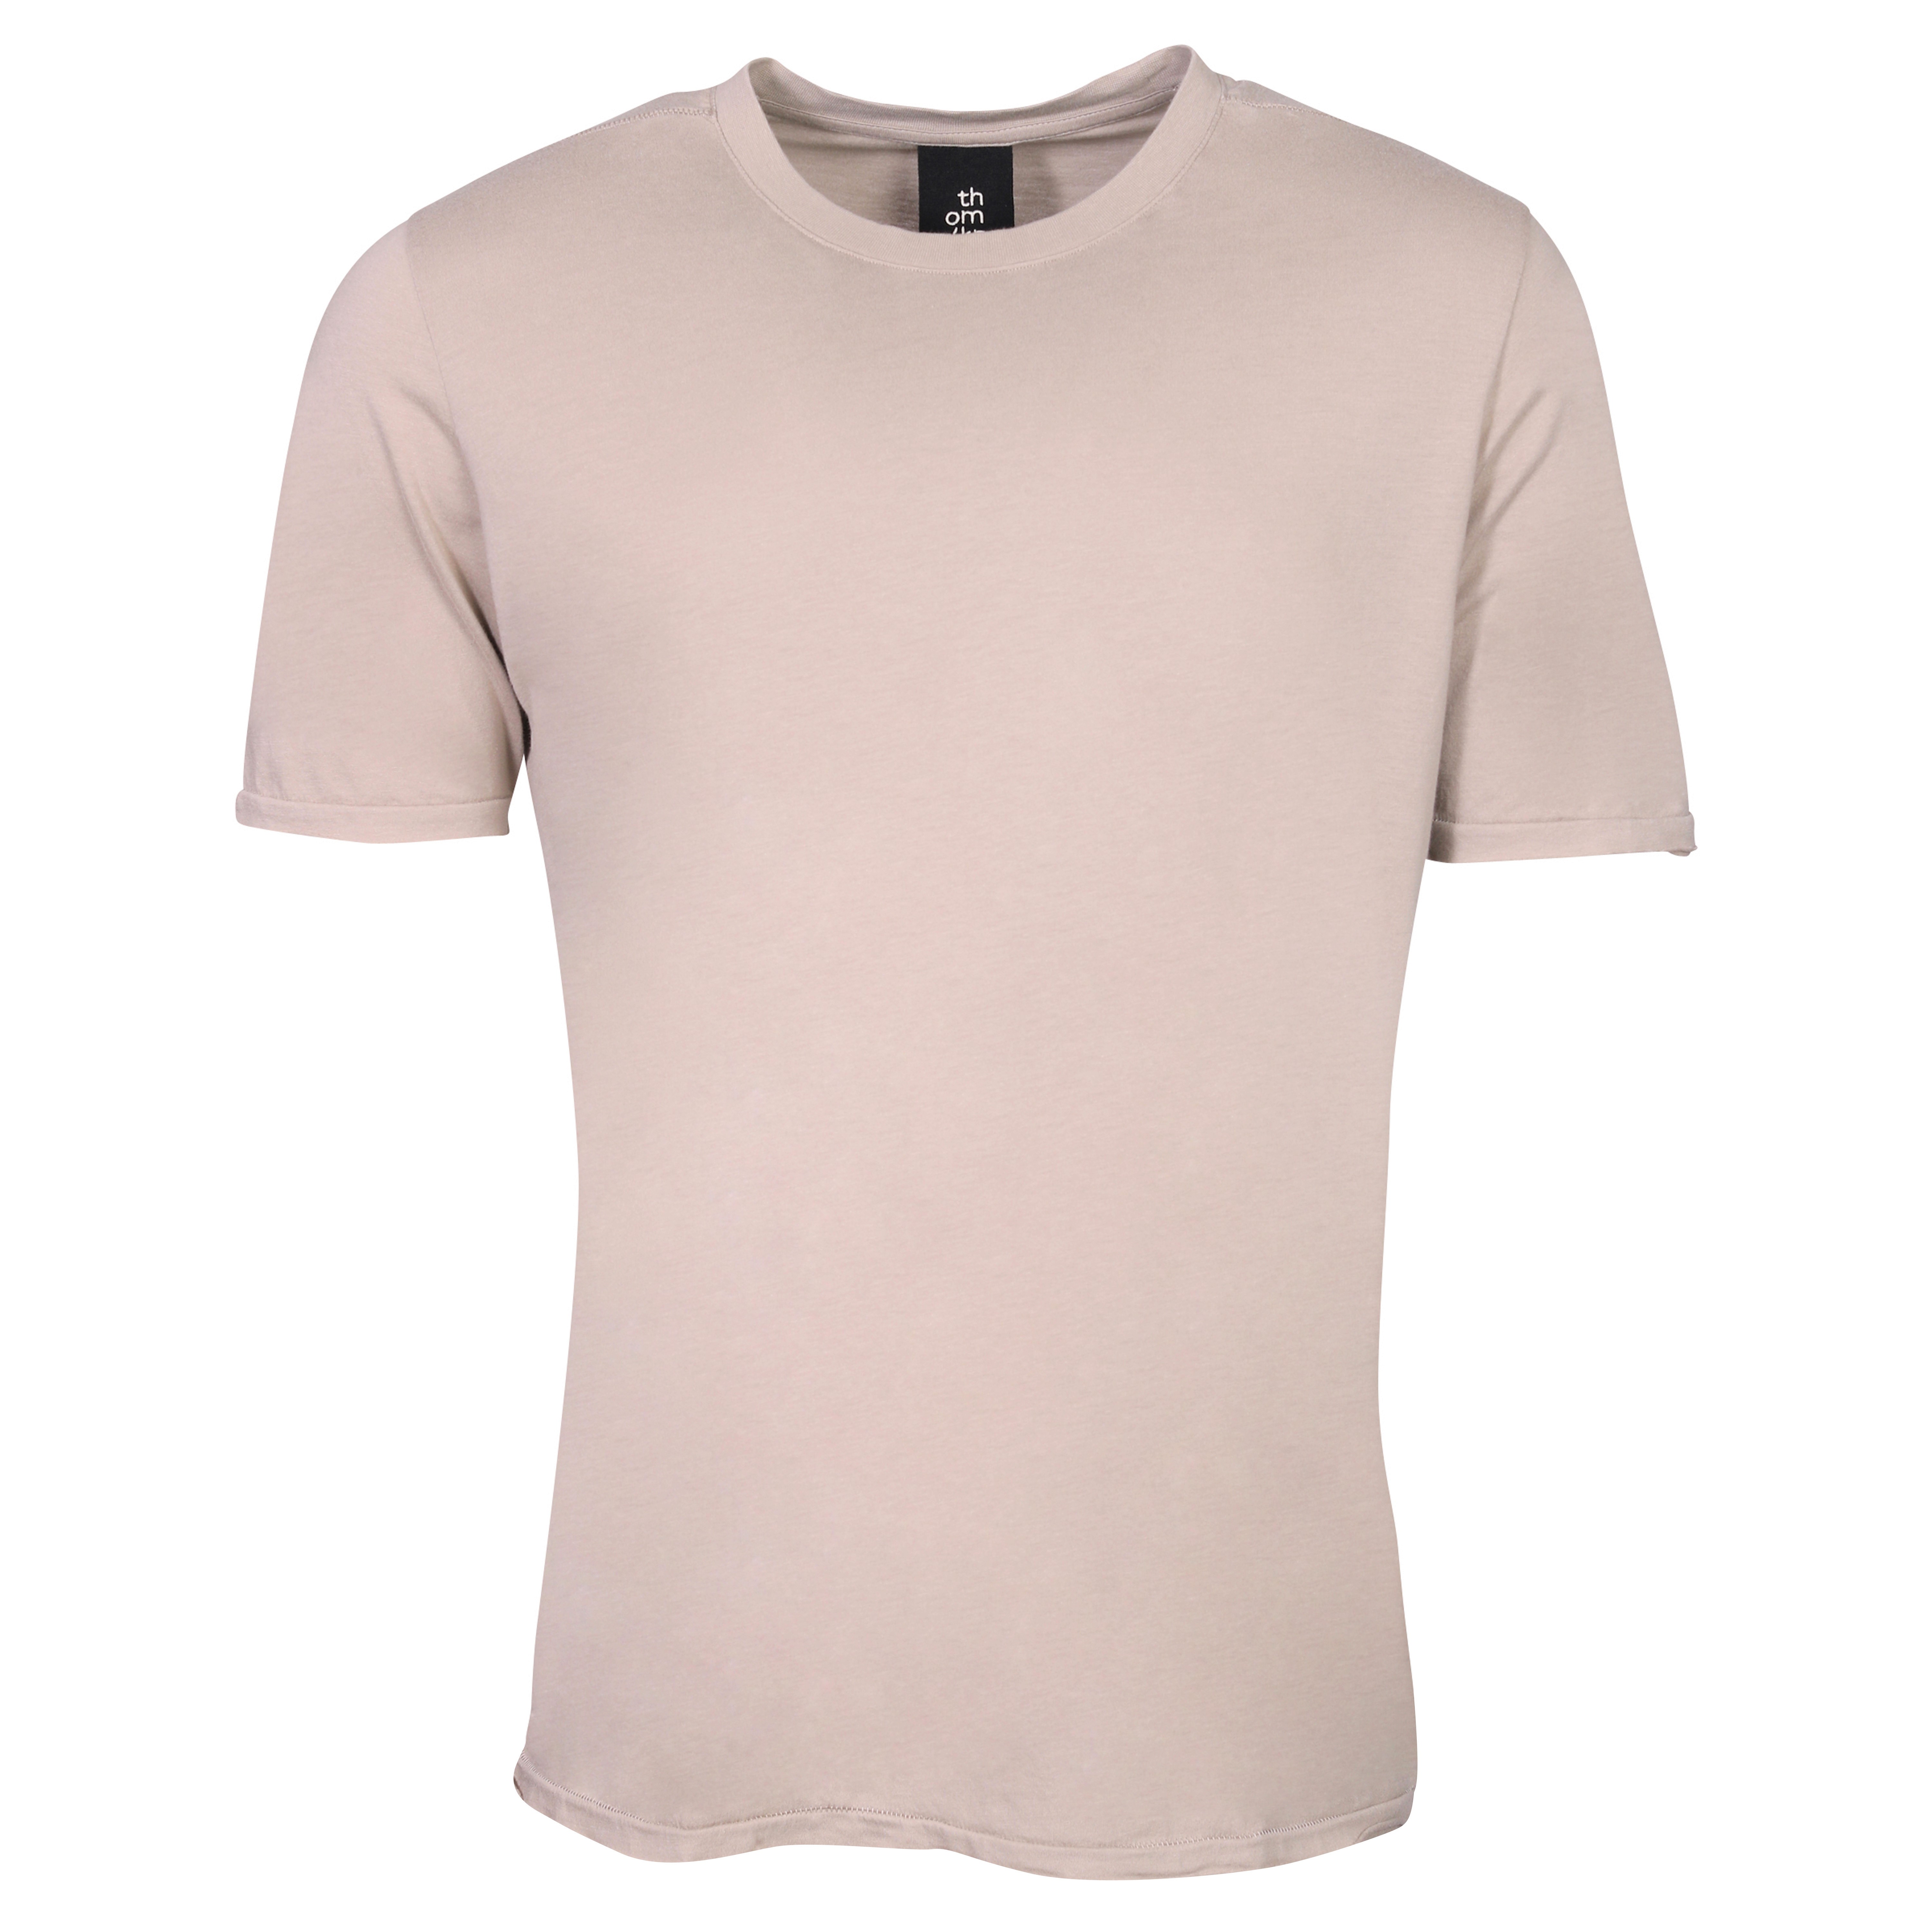 Thom Krom Crew Neck T-Shirt in Sand